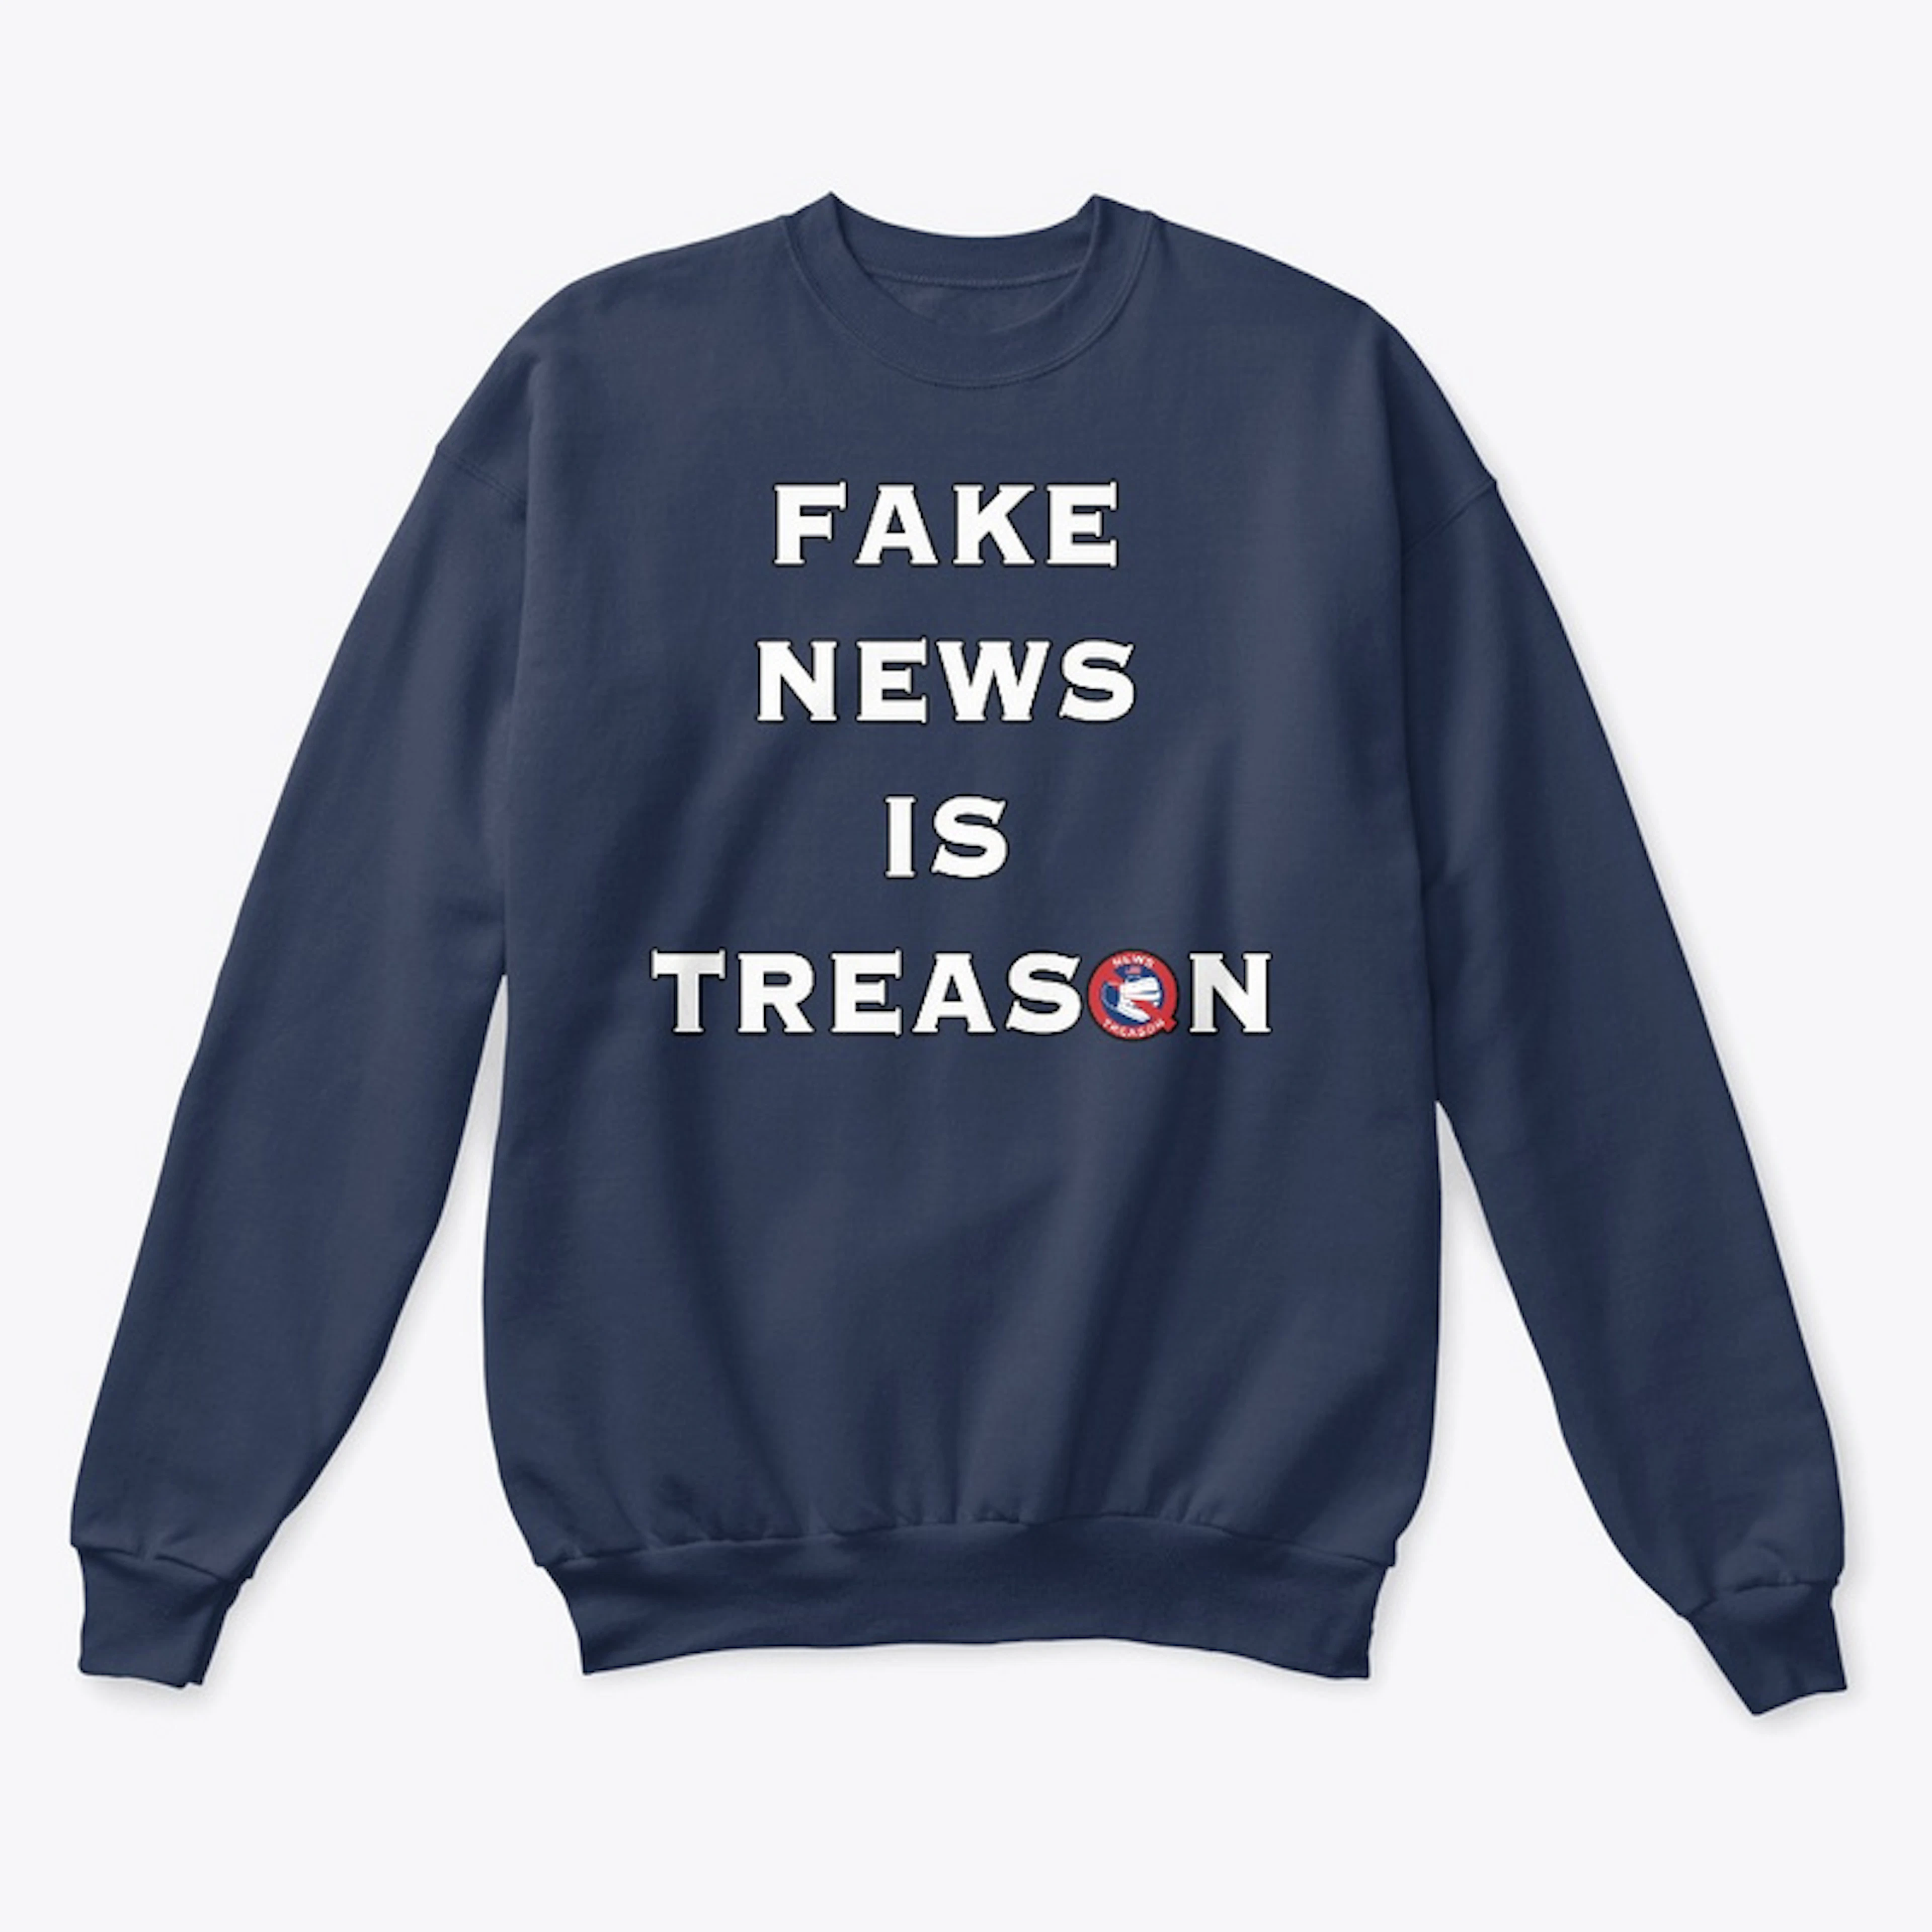 The Fake News Collection